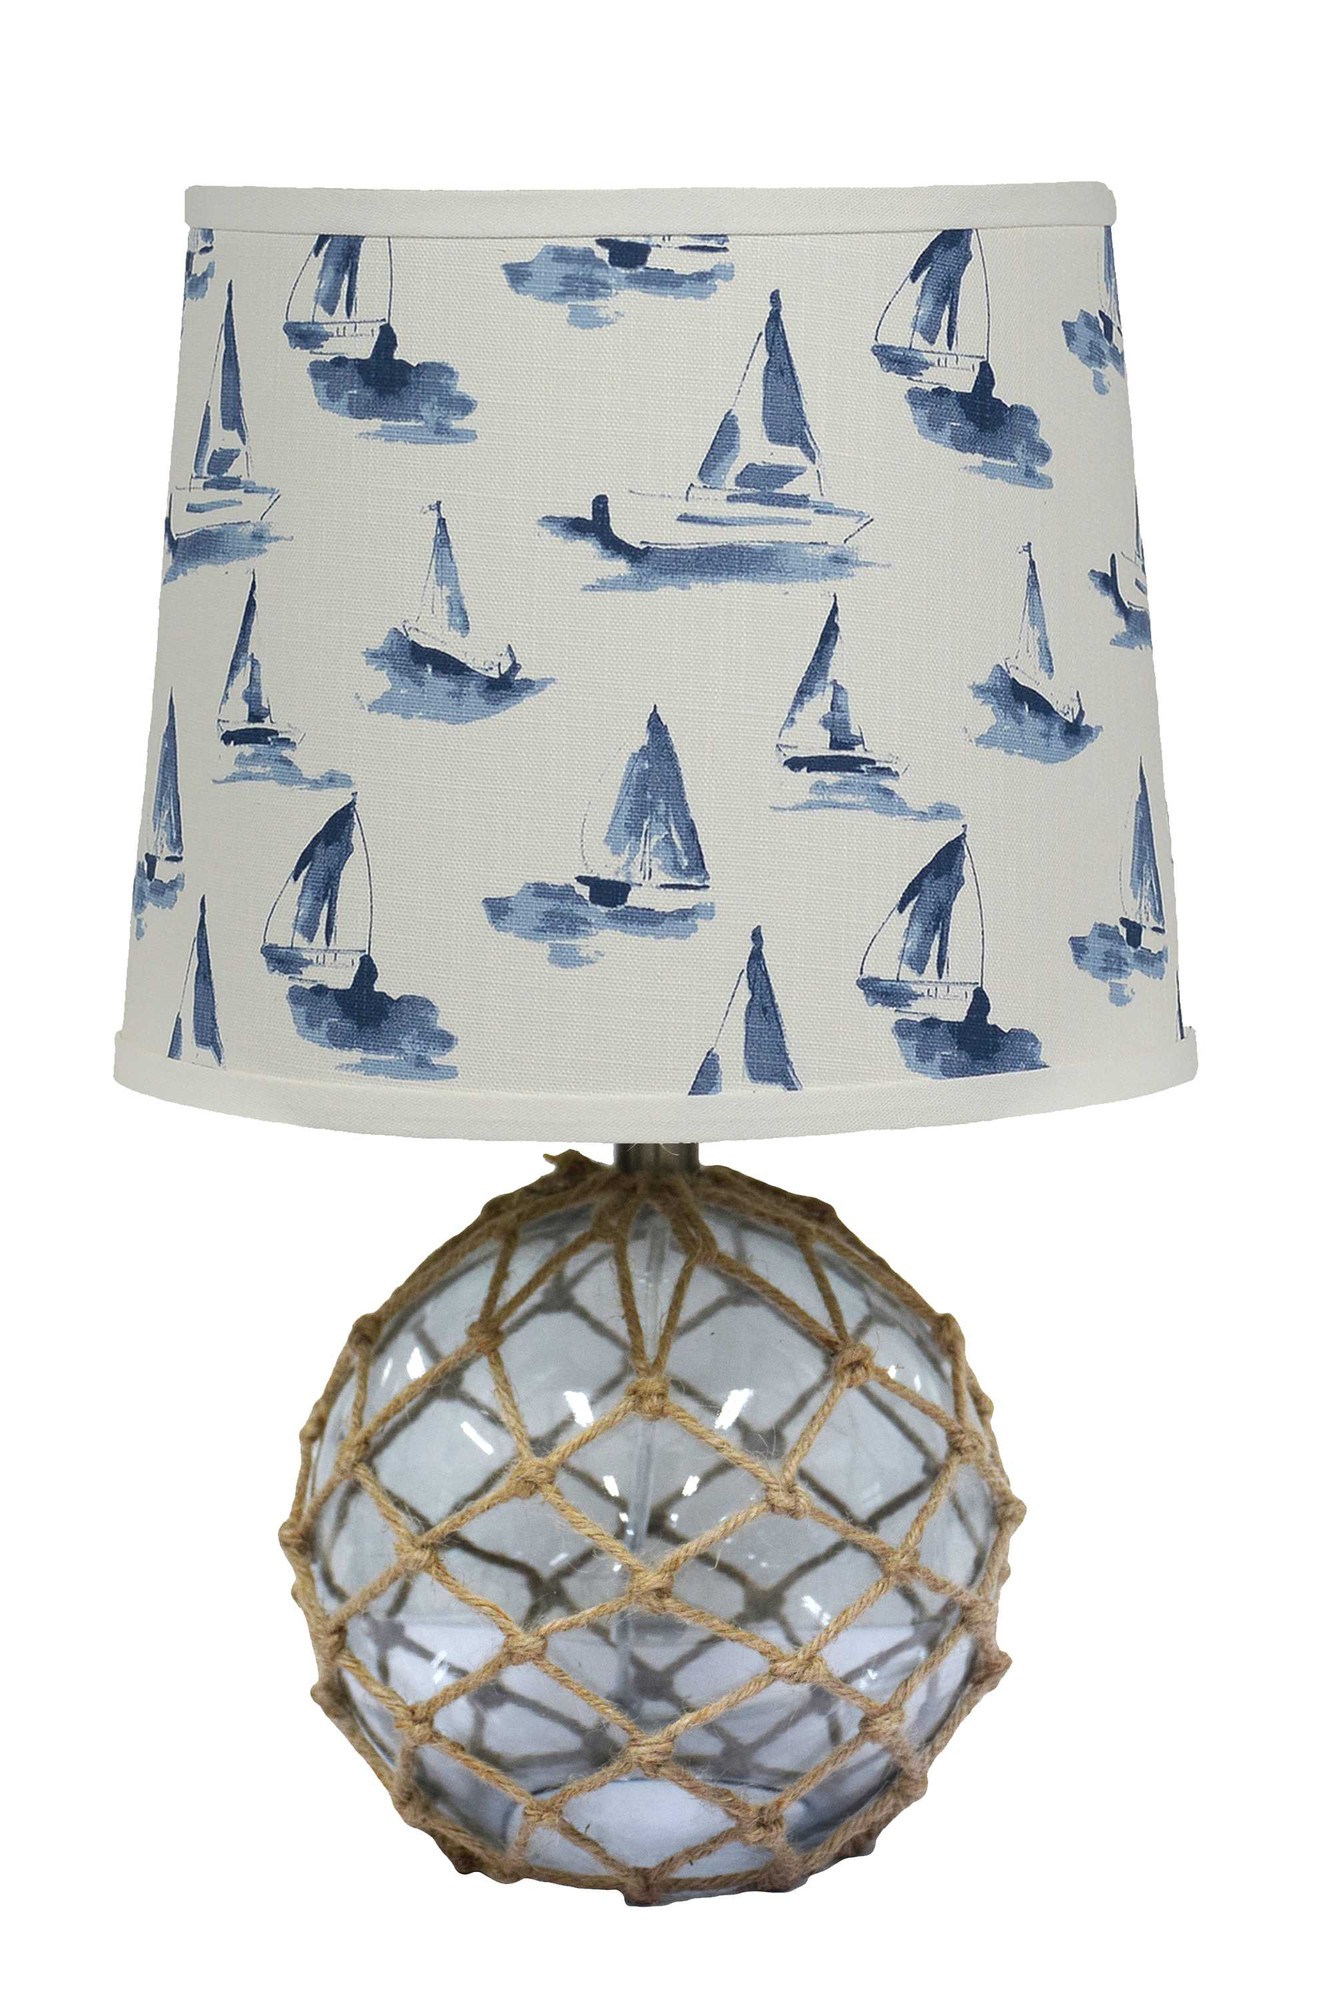 Glass and Net Finish Table Lamp with Sailboats Shade